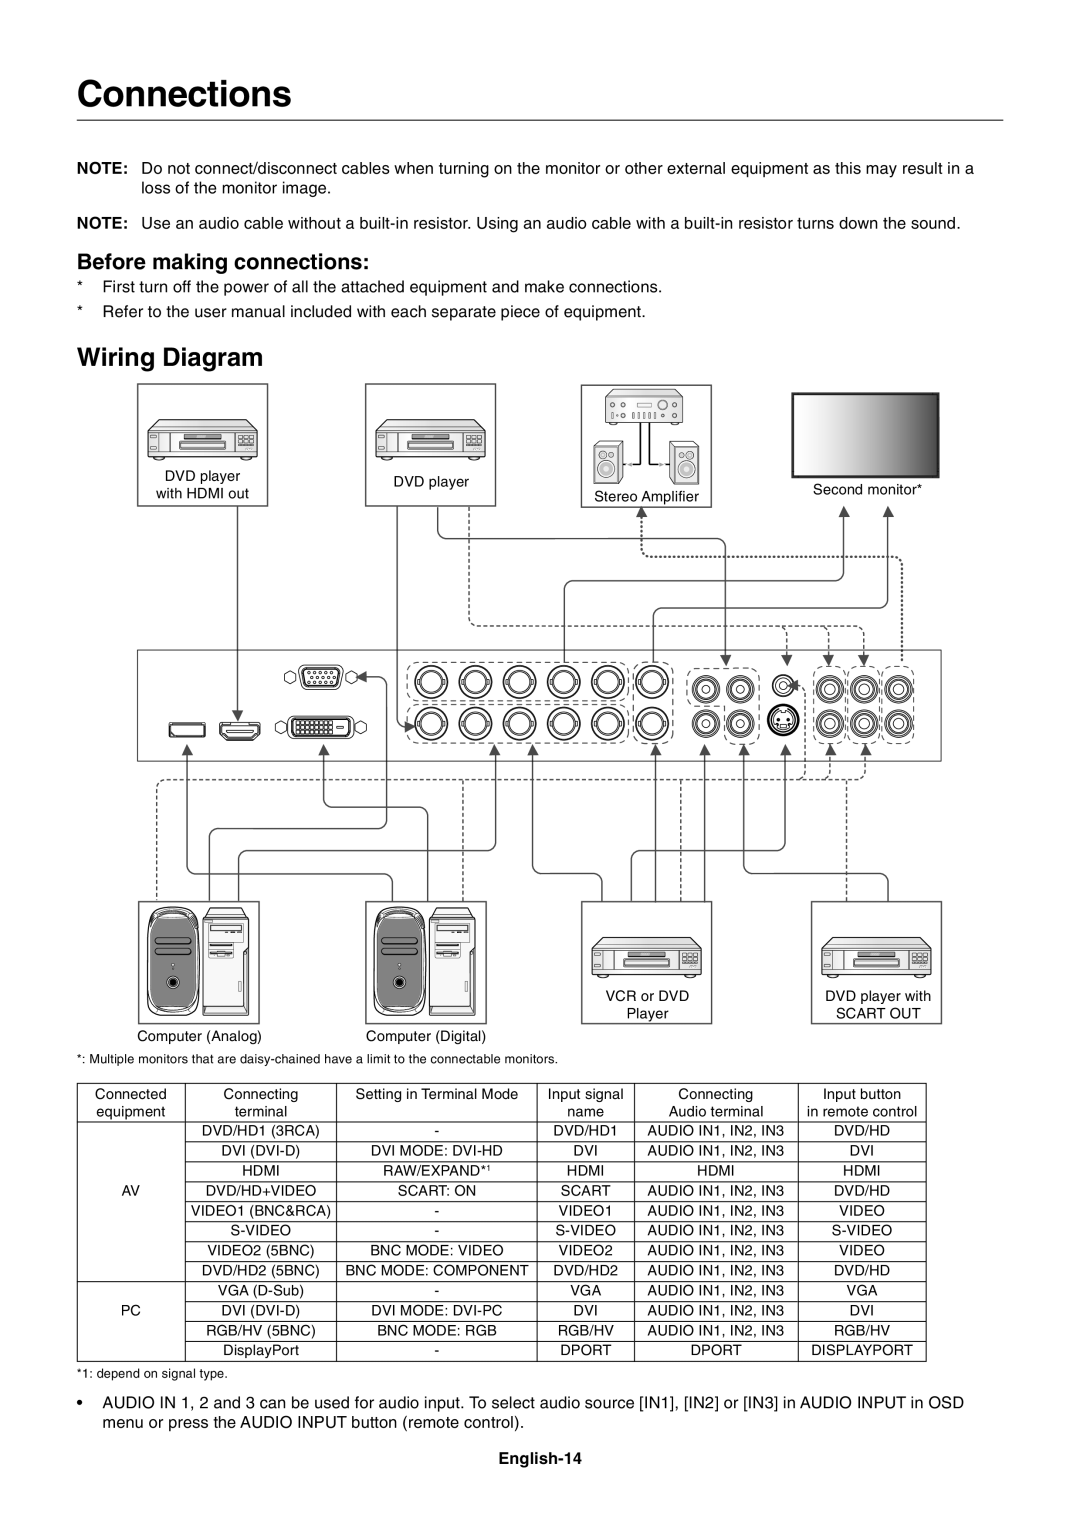 NEC MULTISYNC X462HB user manual Connections, Wiring Diagram, Before making connections 